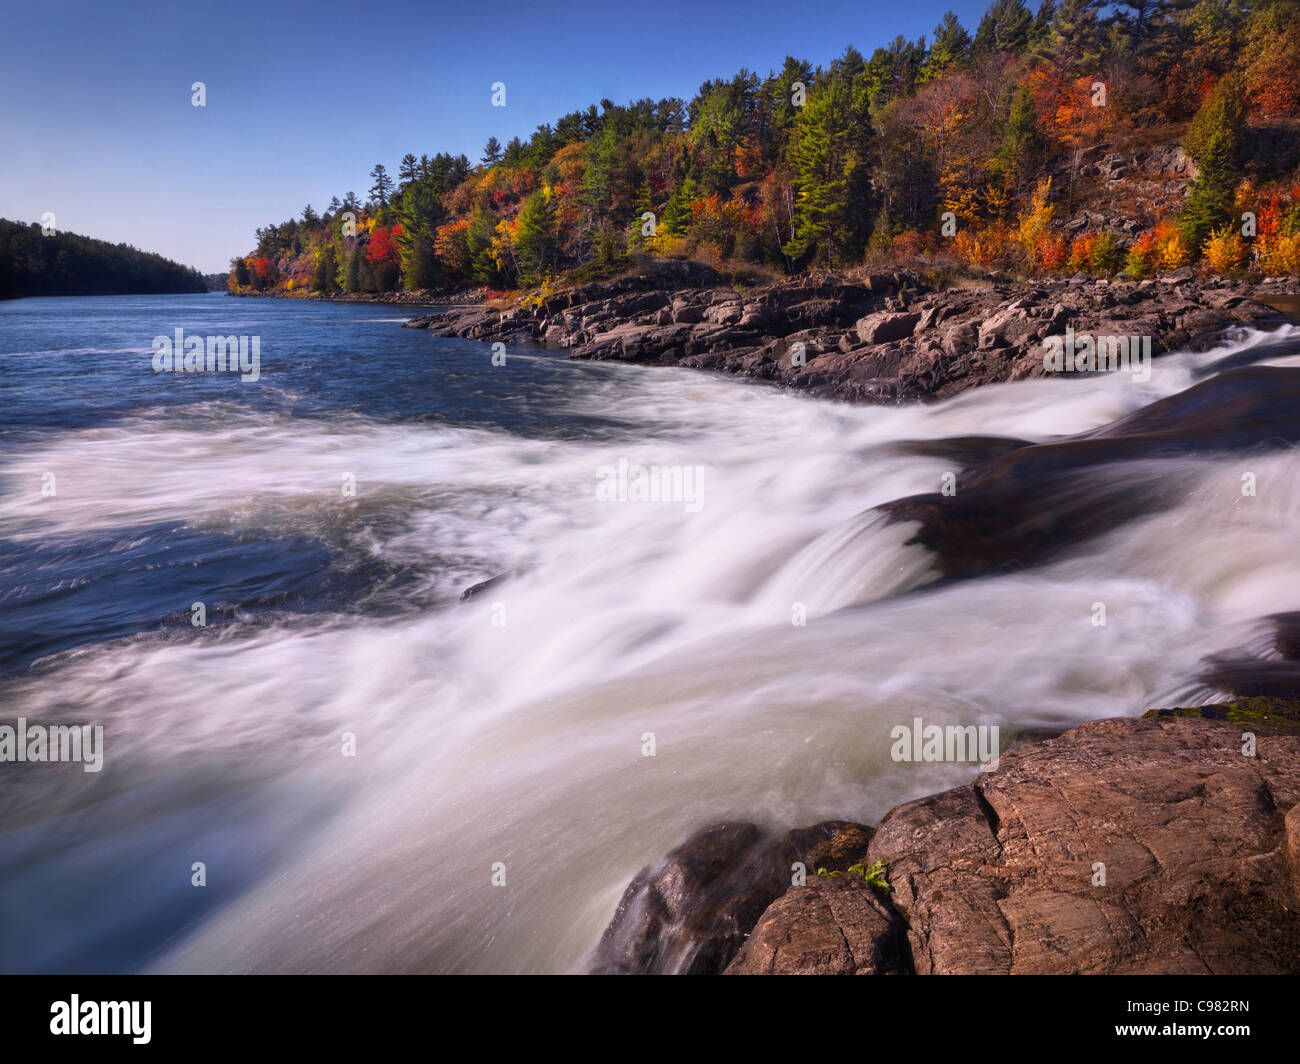 Recollet Falls of the French River. Fall nature scenic. Ontario, Canada. Stock Photo